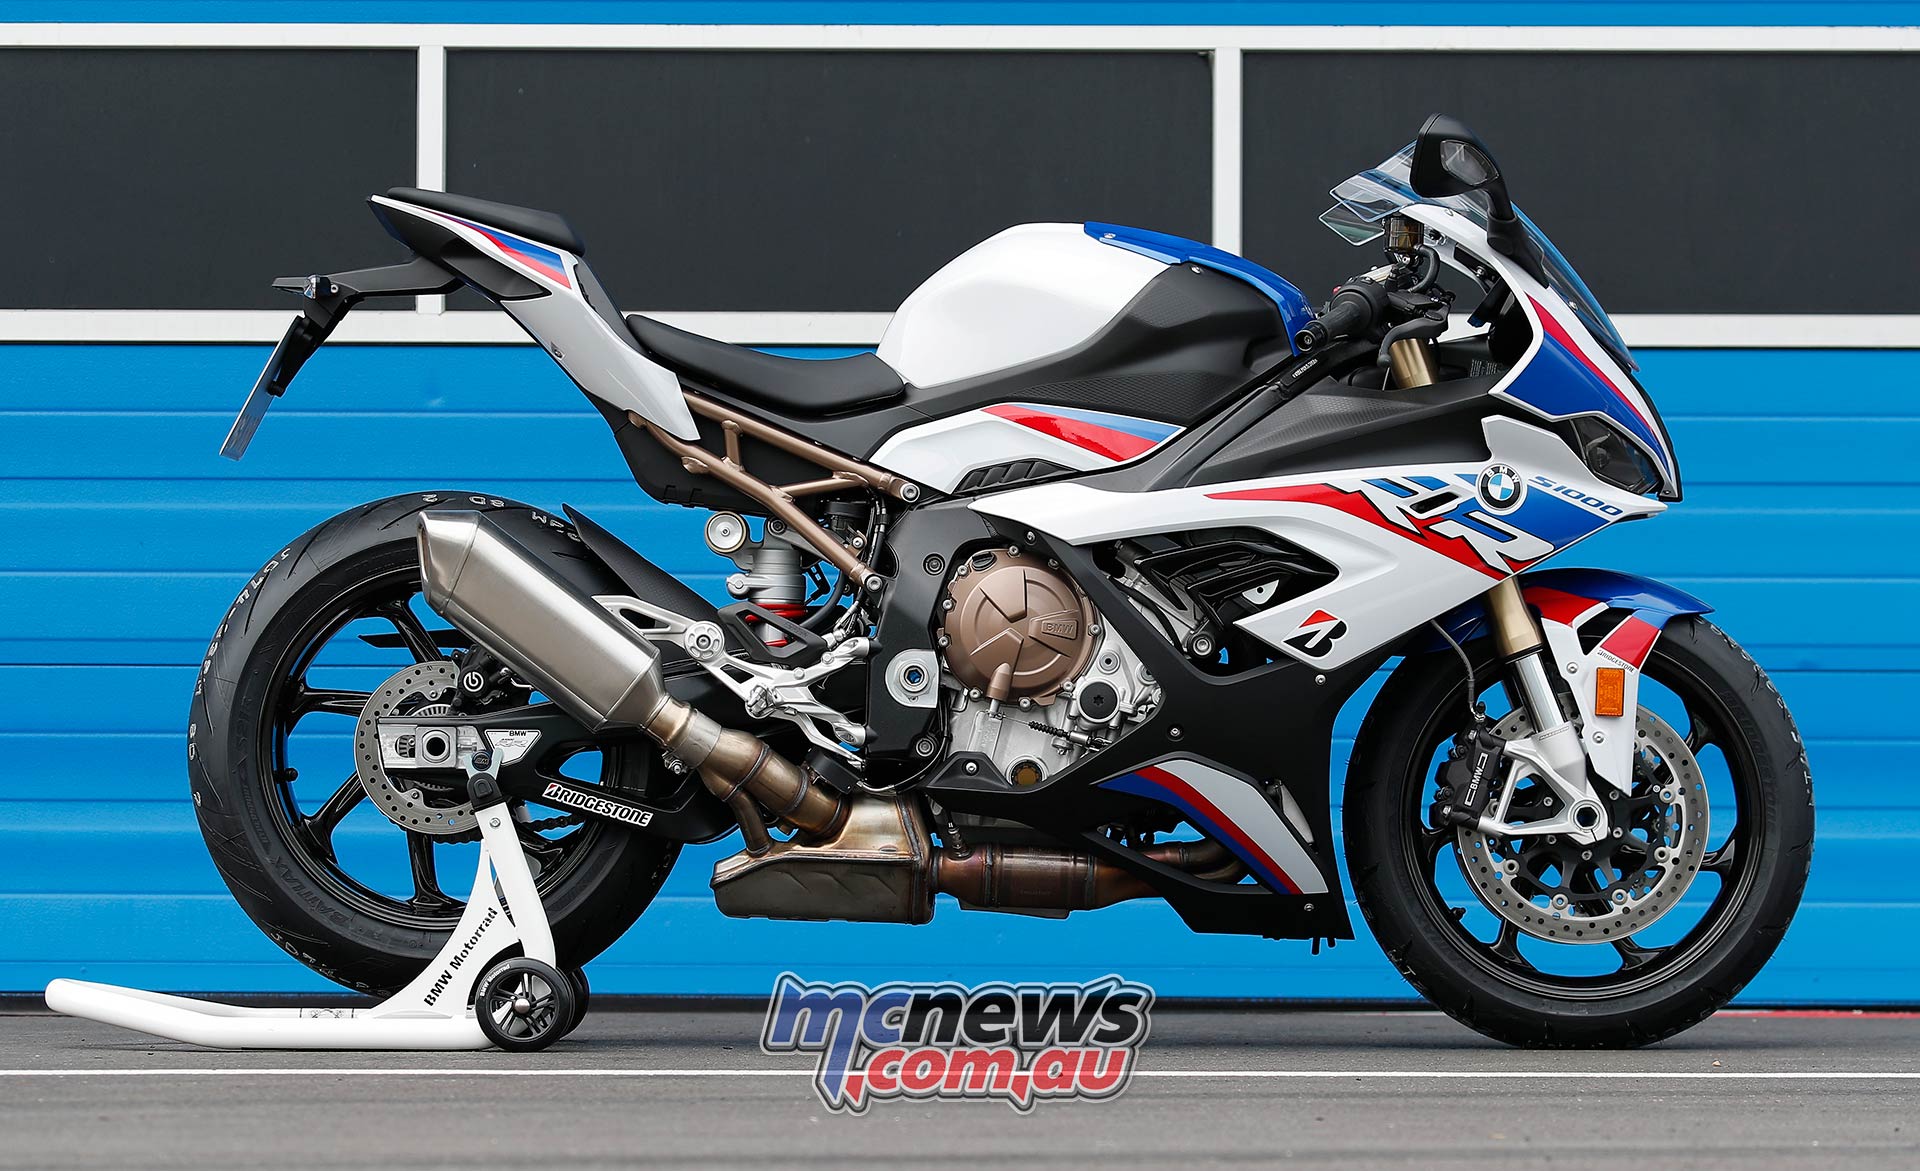 BMW S 1000 RR M Review. Motorcycle Test. Motorcycle News, Sport and Reviews